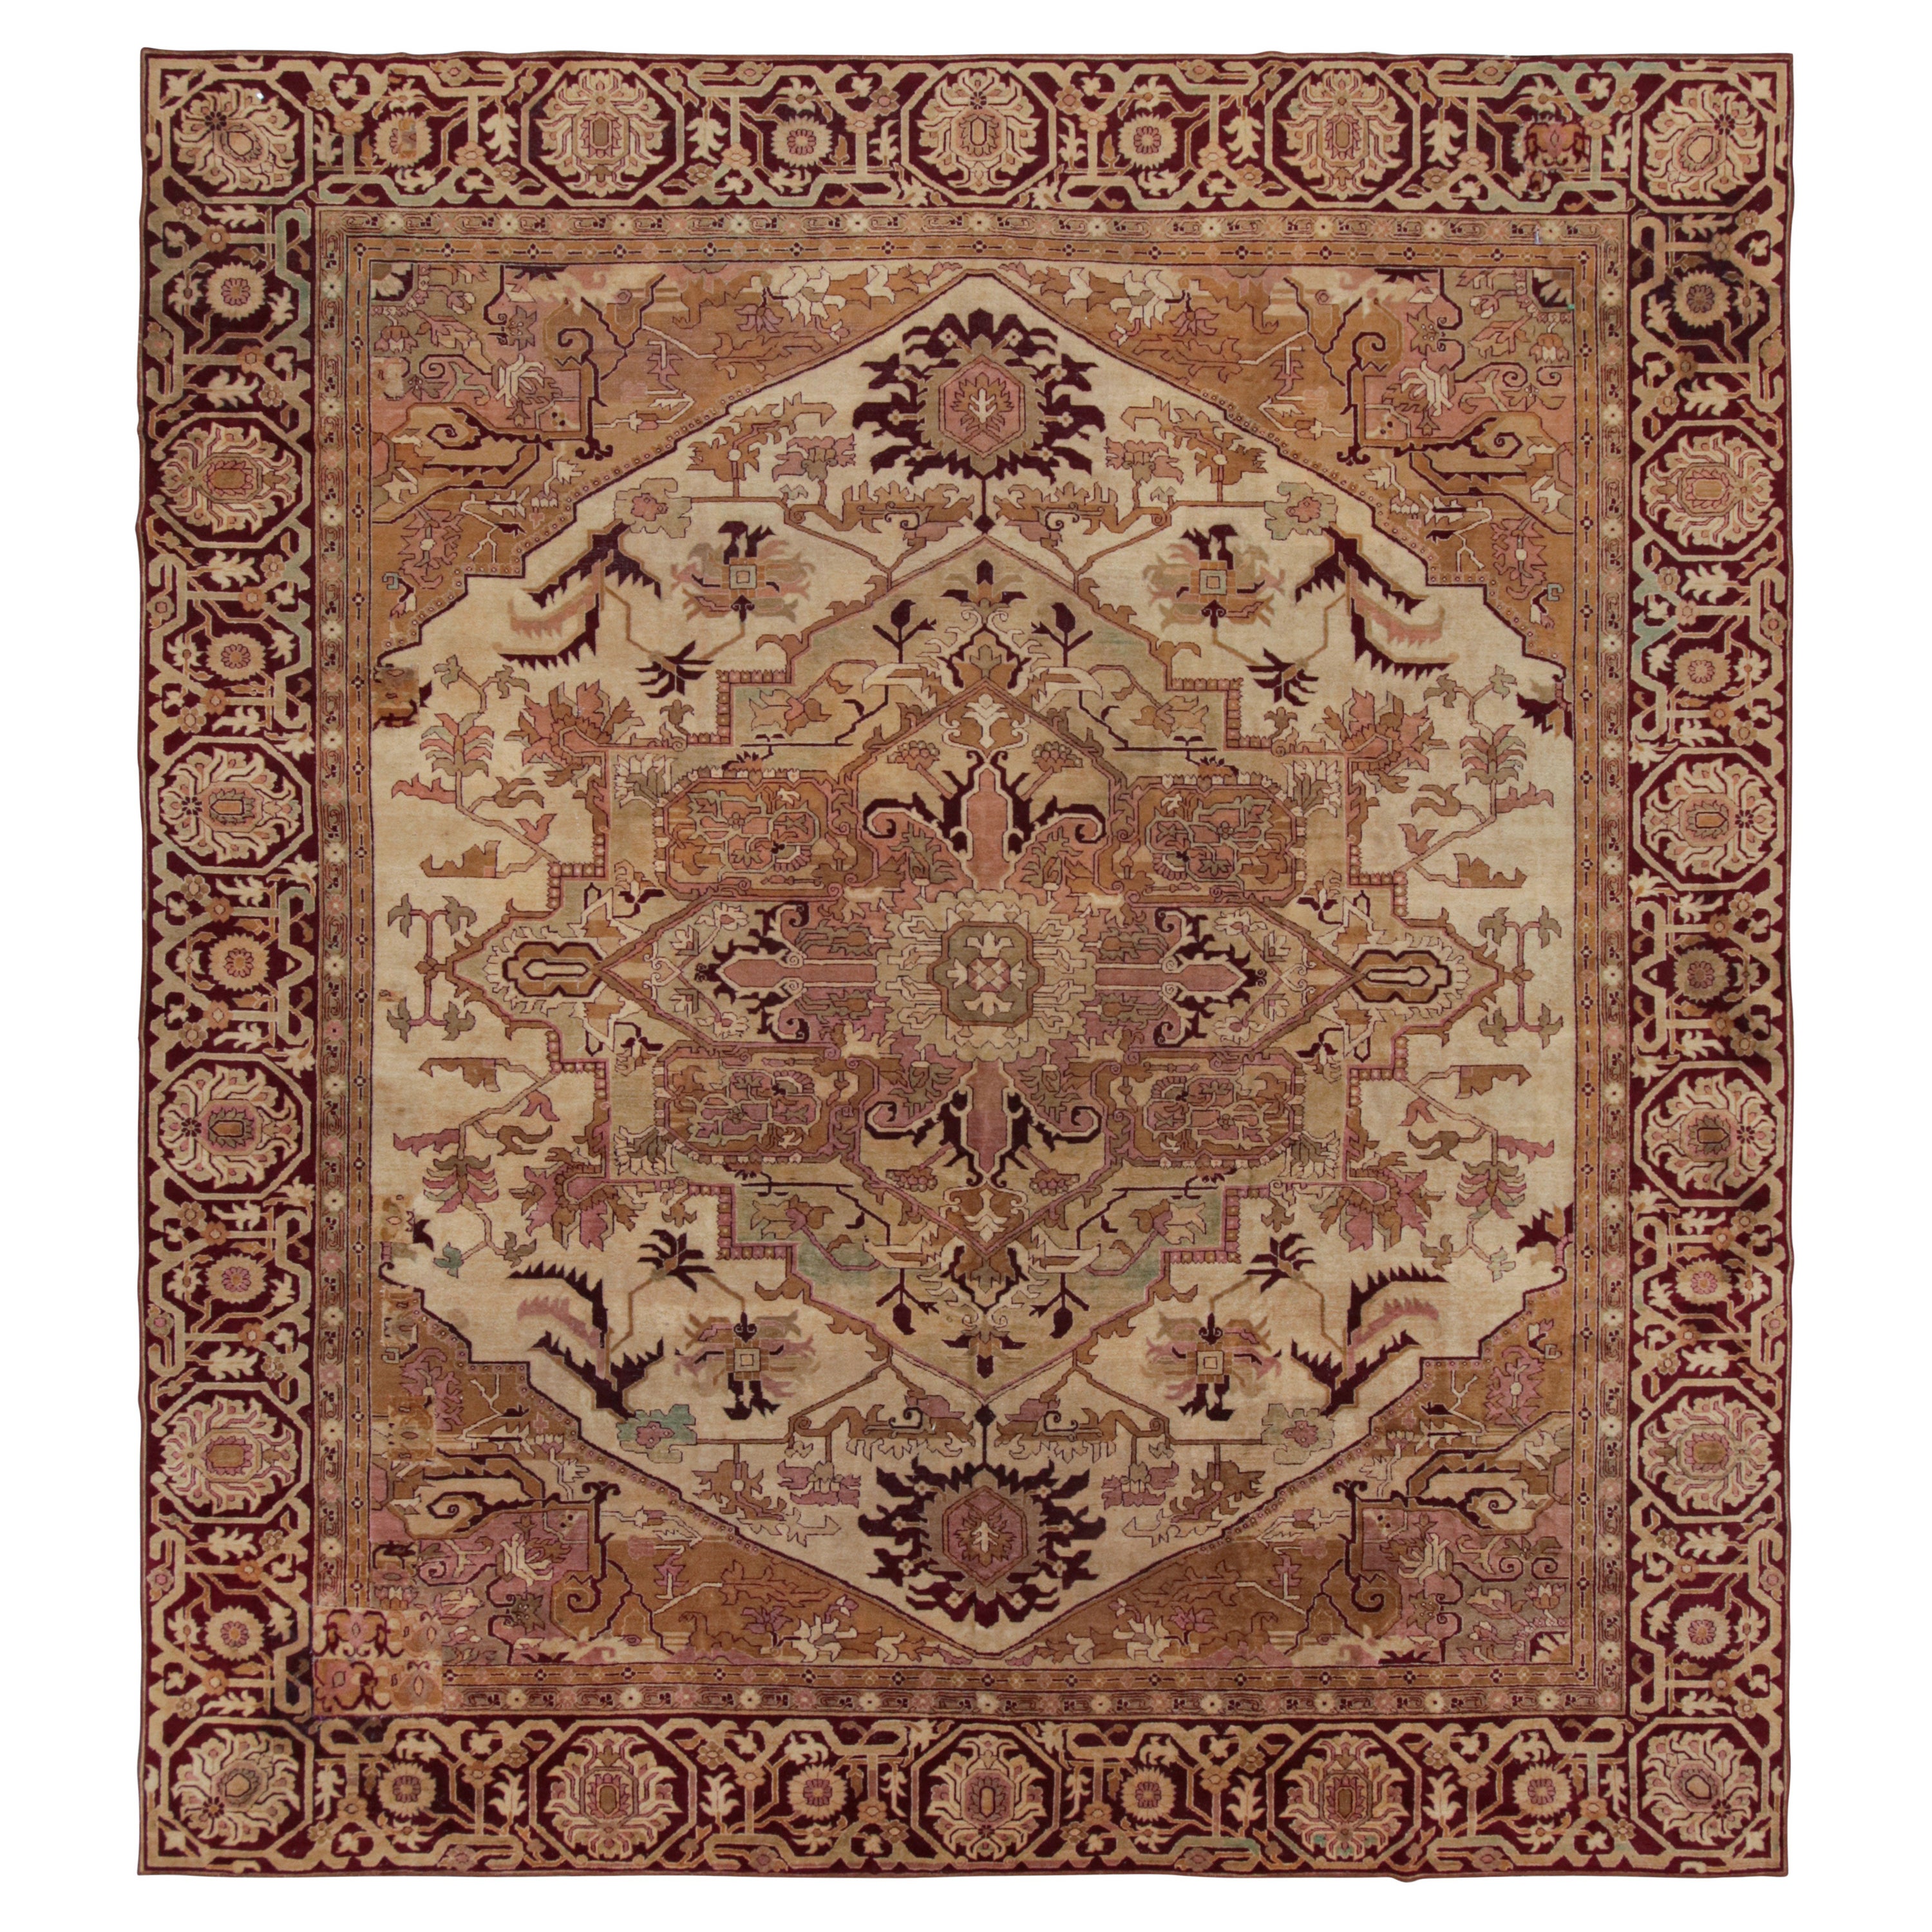 Antique Amritsar Rug in Beige with Green and Pink Medallion, from Rug & Kilim